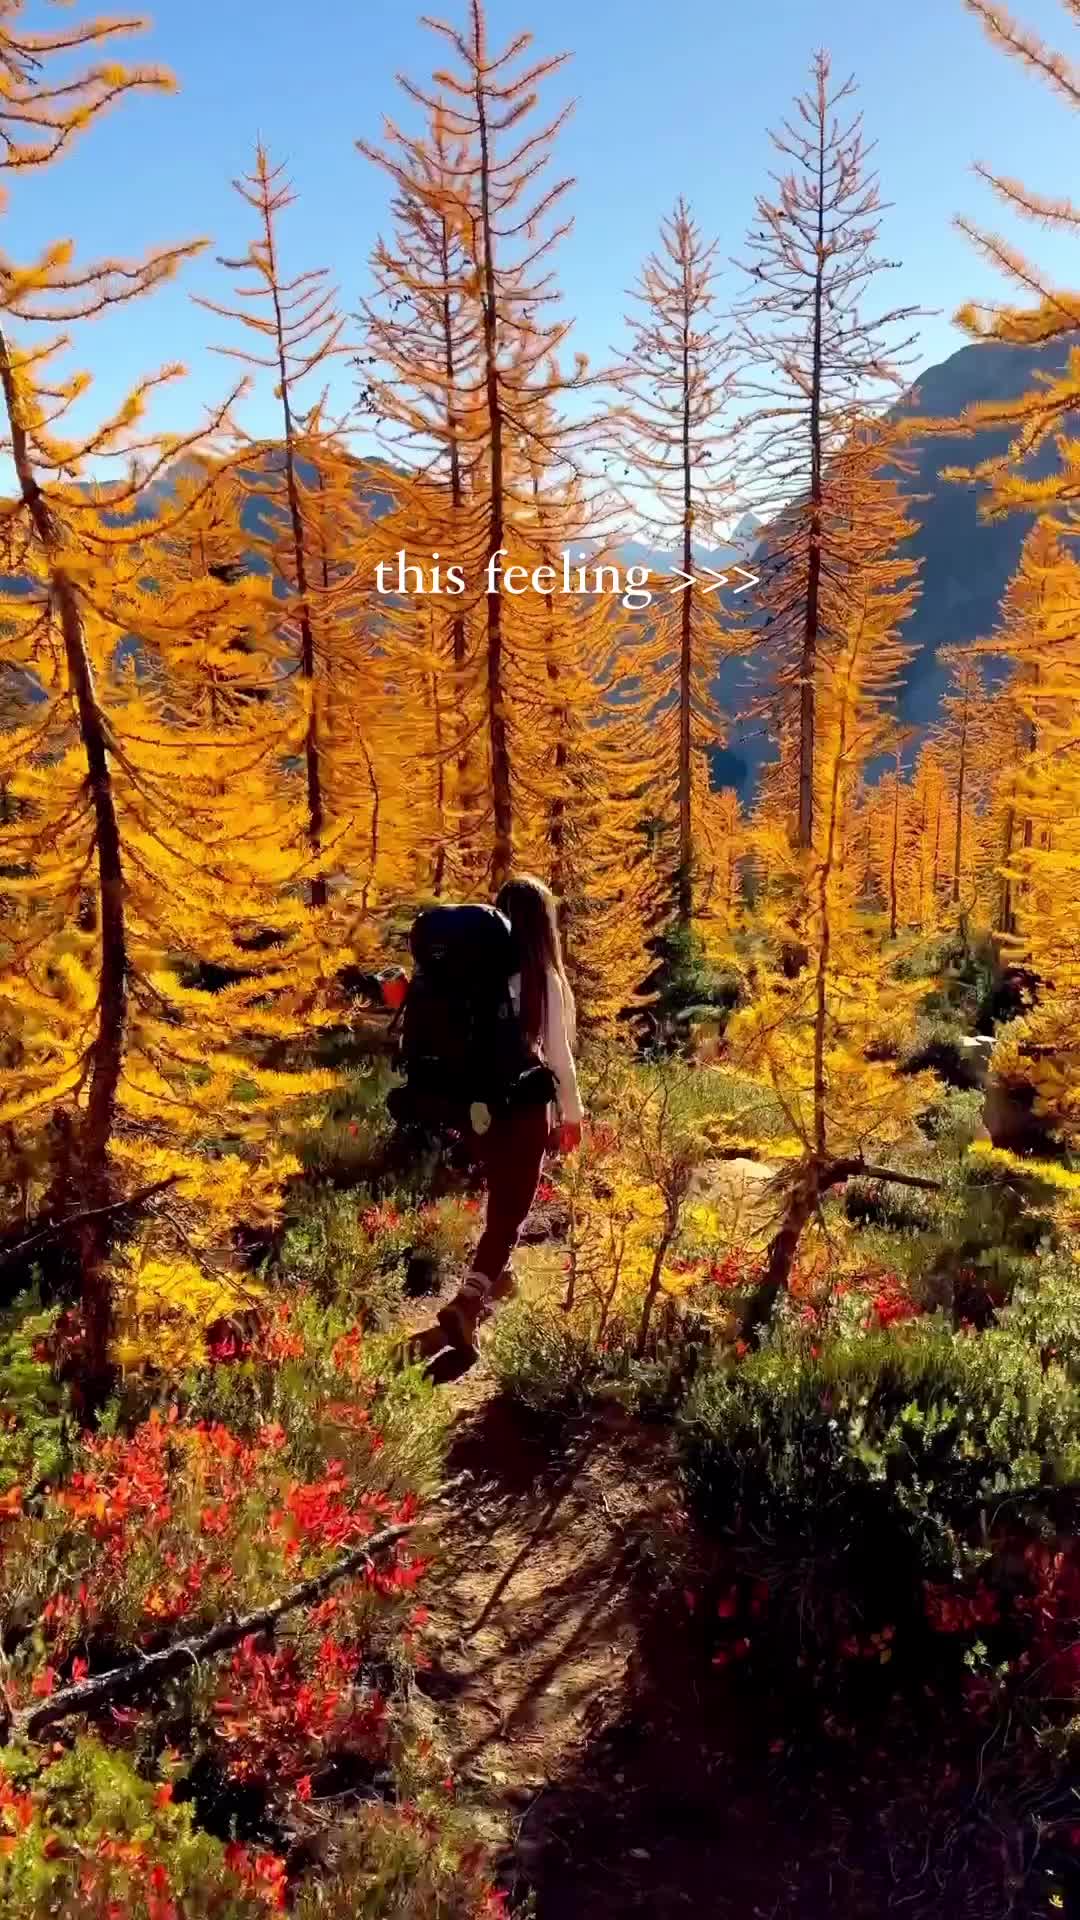 North Cascades: Feel Alive in Nature's Beauty